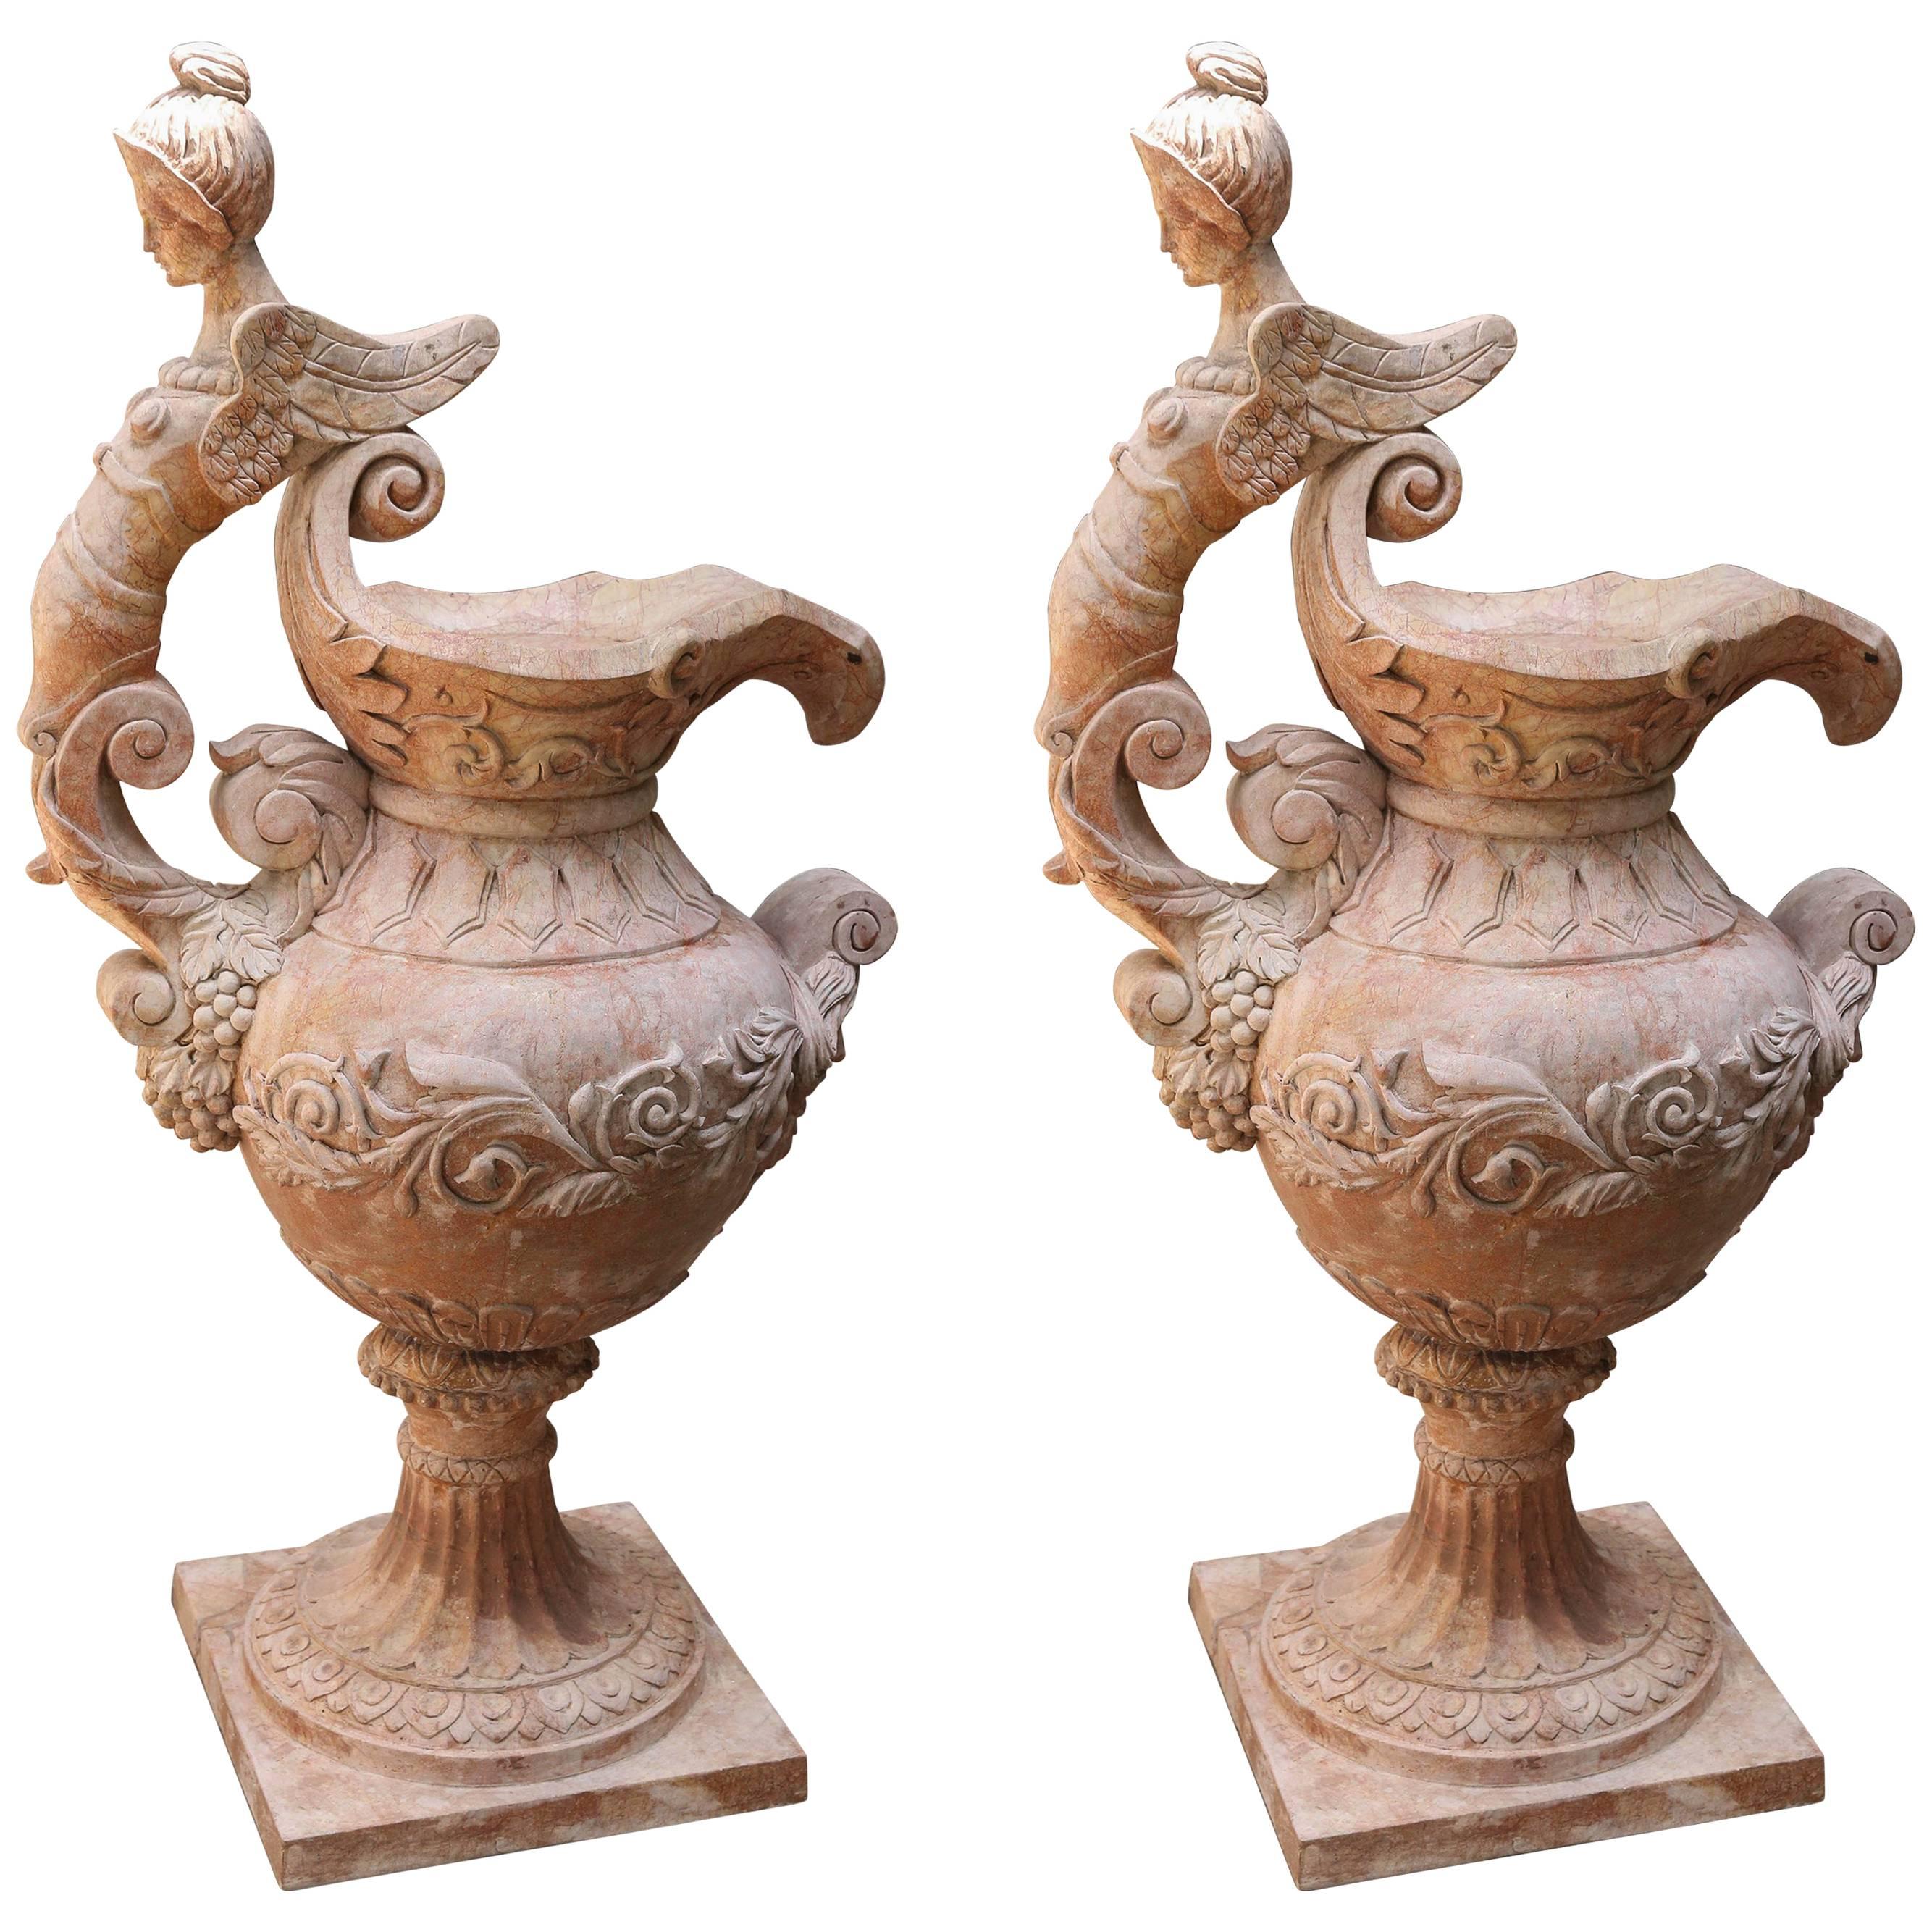 Pair of Neoclassical Style Garden Sculptures in Form of Ewers